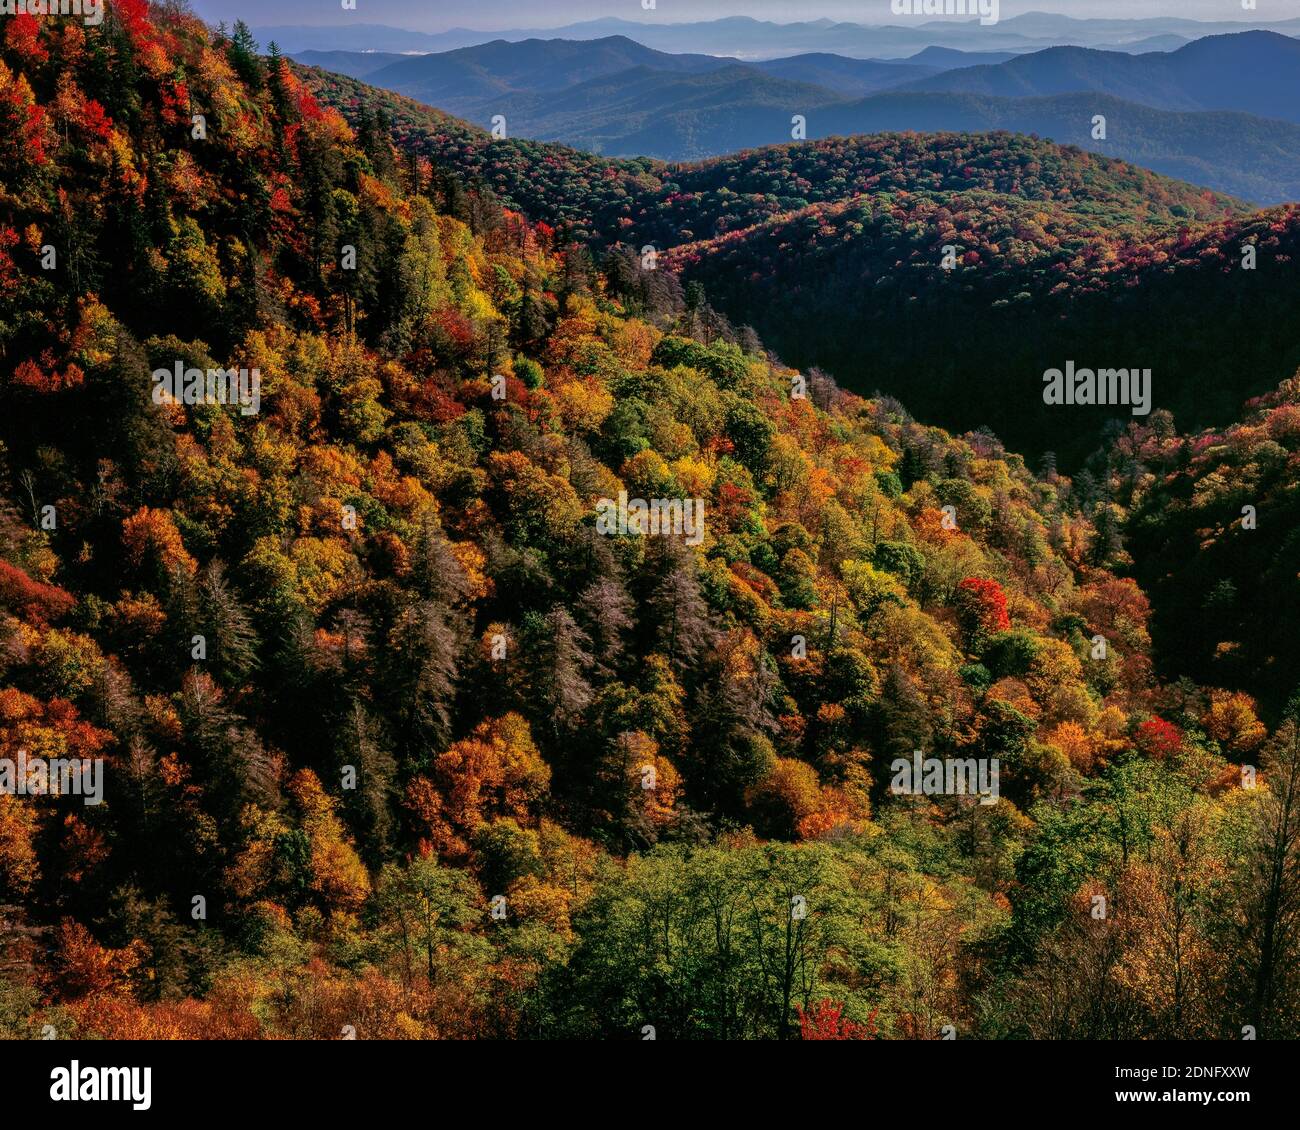 Autumn Color, East Fork, Pigeon River Overlook, Blue Ridge Parkway, Pisgah National Forest, North Carolina Stock Photo